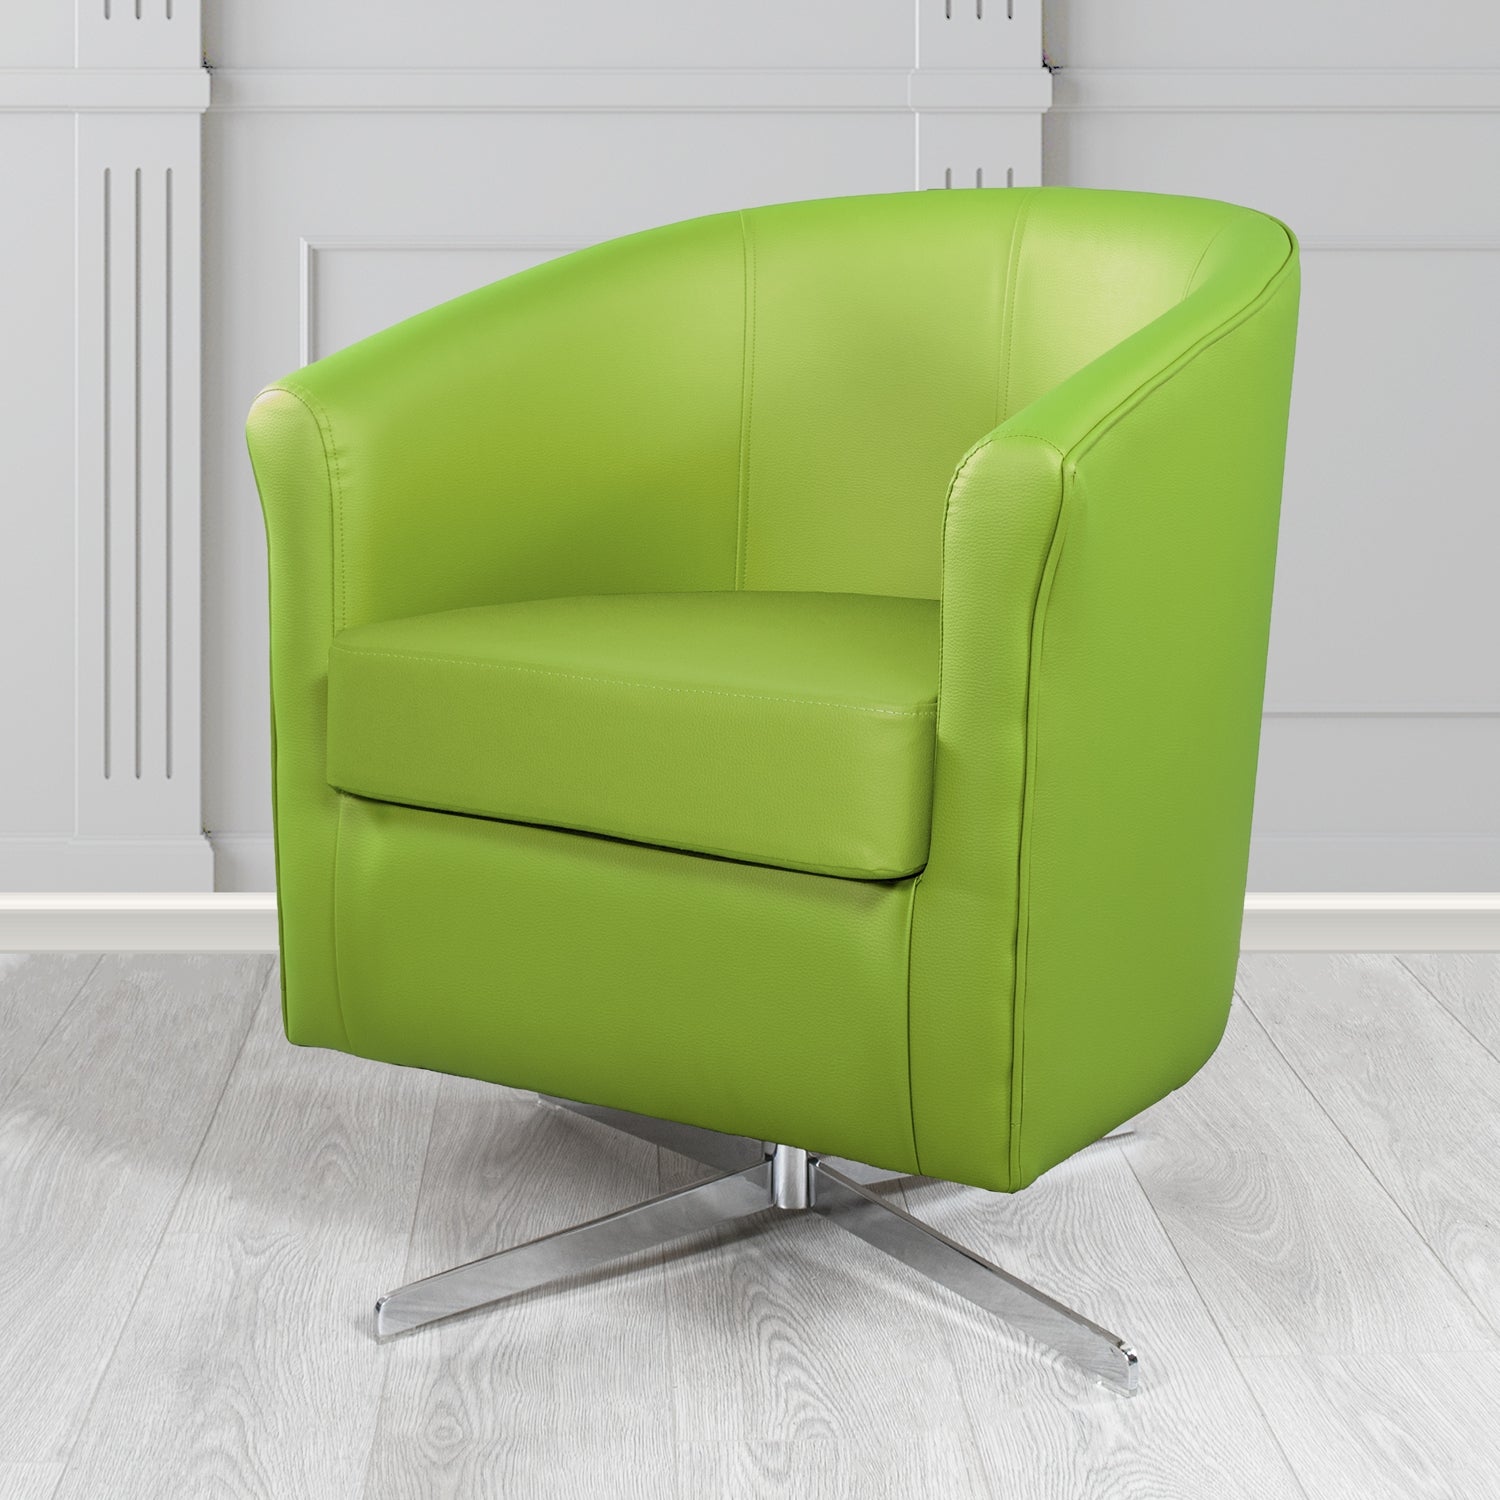 Cannes Swivel Tub Chair in Just Colour Citrus Green Crib 5 Faux Leather - The Tub Chair Shop